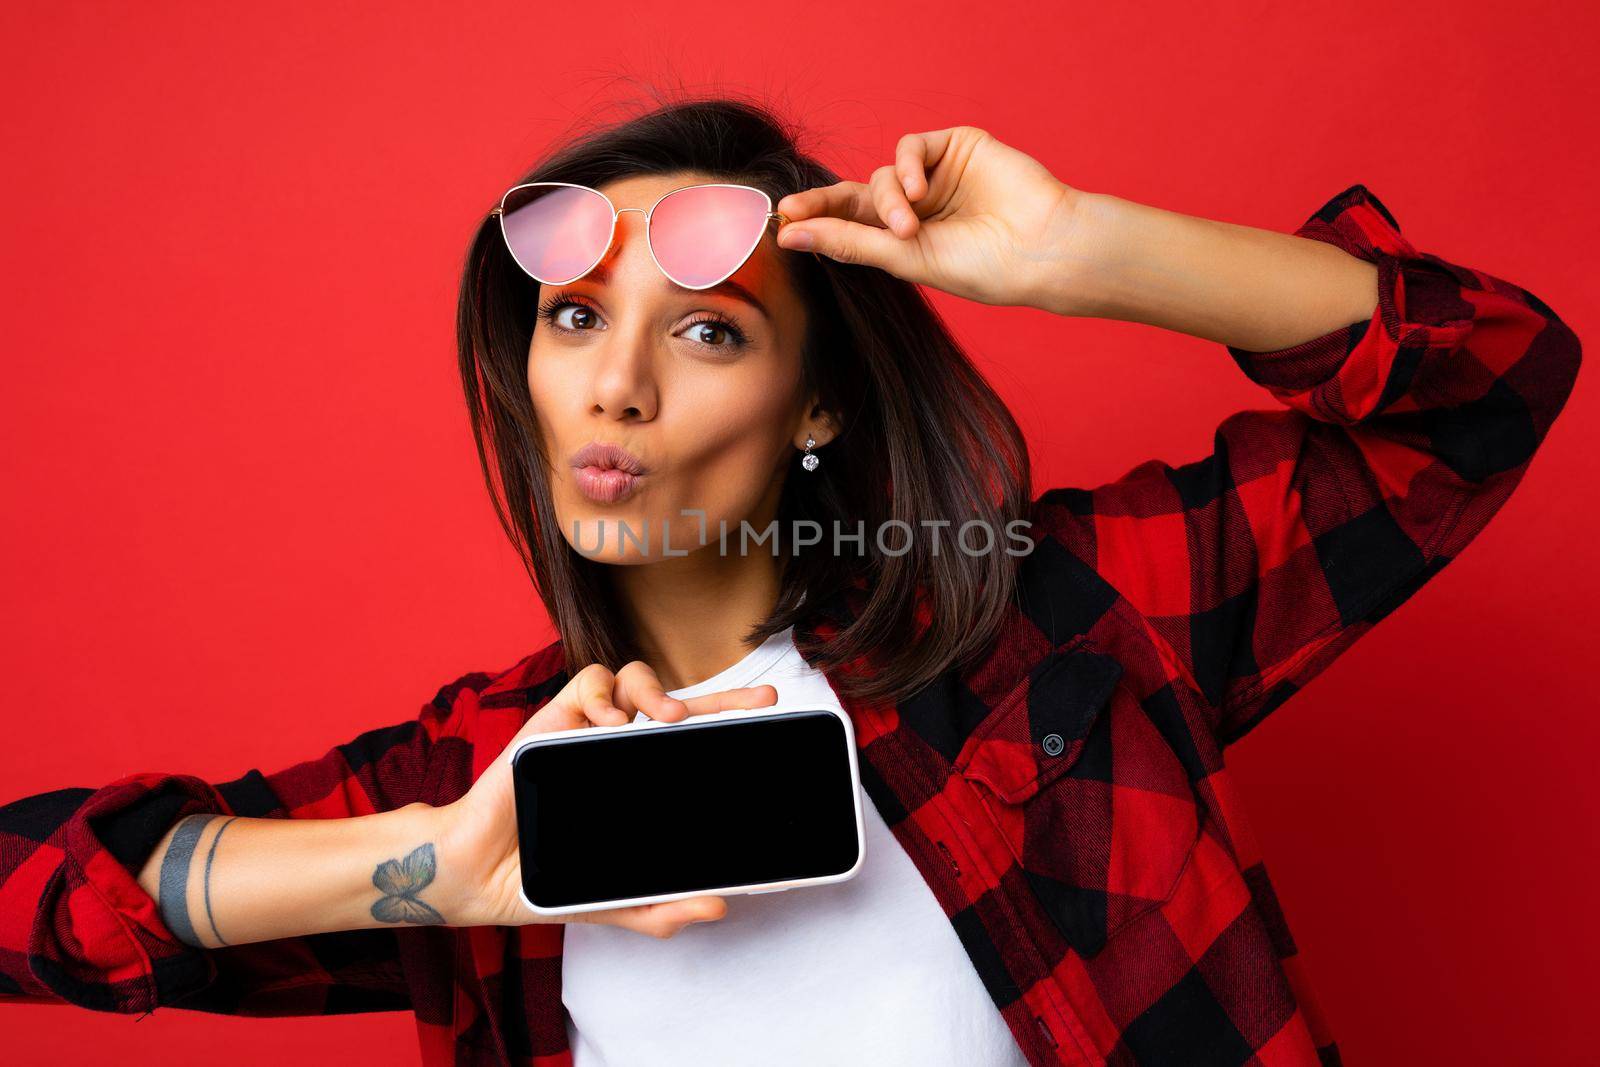 Photo of beautiful smiling young woman good looking wearing casual stylish red shirt white t-shirt and red sunglasses standing isolated on red background with copy space holding smartphone showing phone in hand with empty screen display for mockup looking at camera and giving kiss.